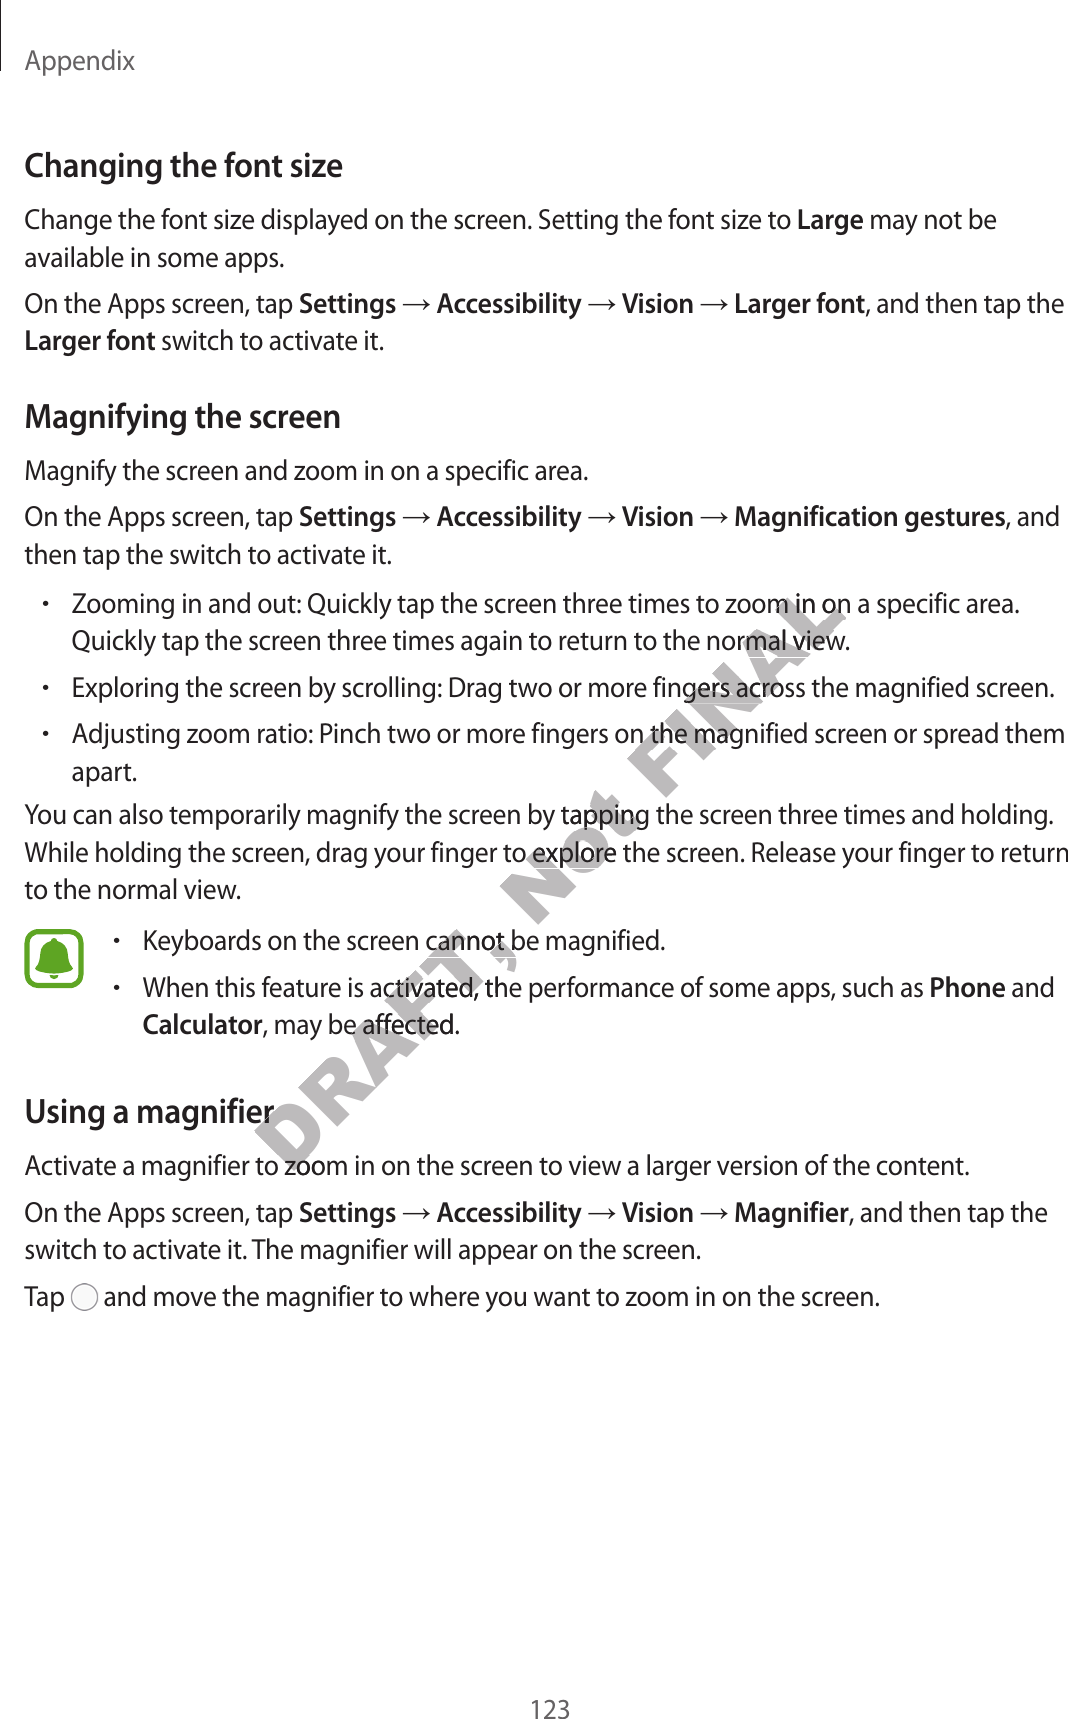 Appendix123Changing the font sizeChange the font size displayed on the screen. Setting the font size to Large may not be available in some apps.On the Apps screen, tap Settings  Accessibility  Vision  Larger font, and then tap the Larger font switch to activate it.Magnifying the screenMagnify the screen and zoom in on a specific area.On the Apps screen, tap Settings  Accessibility  Vision  Magnification gestures, and then tap the switch to activate it.•Zooming in and out: Quickly tap the screen three times to zoom in on a specific area. Quickly tap the screen three times again to return to the normal view.•Exploring the screen by scrolling: Drag two or more fingers across the magnified screen.•Adjusting zoom ratio: Pinch two or more fingers on the magnified screen or spread them apart.You can also temporarily magnify the screen by tapping the screen three times and holding. While holding the screen, drag your finger to explore the screen. Release your finger to return to the normal view.•Keyboards on the screen cannot be magnified.•When this feature is activated, the performance of some apps, such as Phone and Calculator, may be affected.Using a magnifierActivate a magnifier to zoom in on the screen to view a larger version of the content.On the Apps screen, tap Settings  Accessibility  Vision  Magnifier, and then tap the switch to activate it. The magnifier will appear on the screen.Tap   and move the magnifier to where you want to zoom in on the screen.DRAFT, een cannot be mageen cannot be mage is activated, the pere is activated, the perDRAFT, y be affected.y be affectednifiernifiernifier to zoom in on the scrnifier to zoom in on the scrNot een by tapping the scry tapping the scrour finger to explore the scrour finger to explore the scrFINALoom in on a specific aroom in on a specific aro the normal viewo the normal viewe fingers across the mage fingers across the mage fingers on the magnified scre fingers on the mag